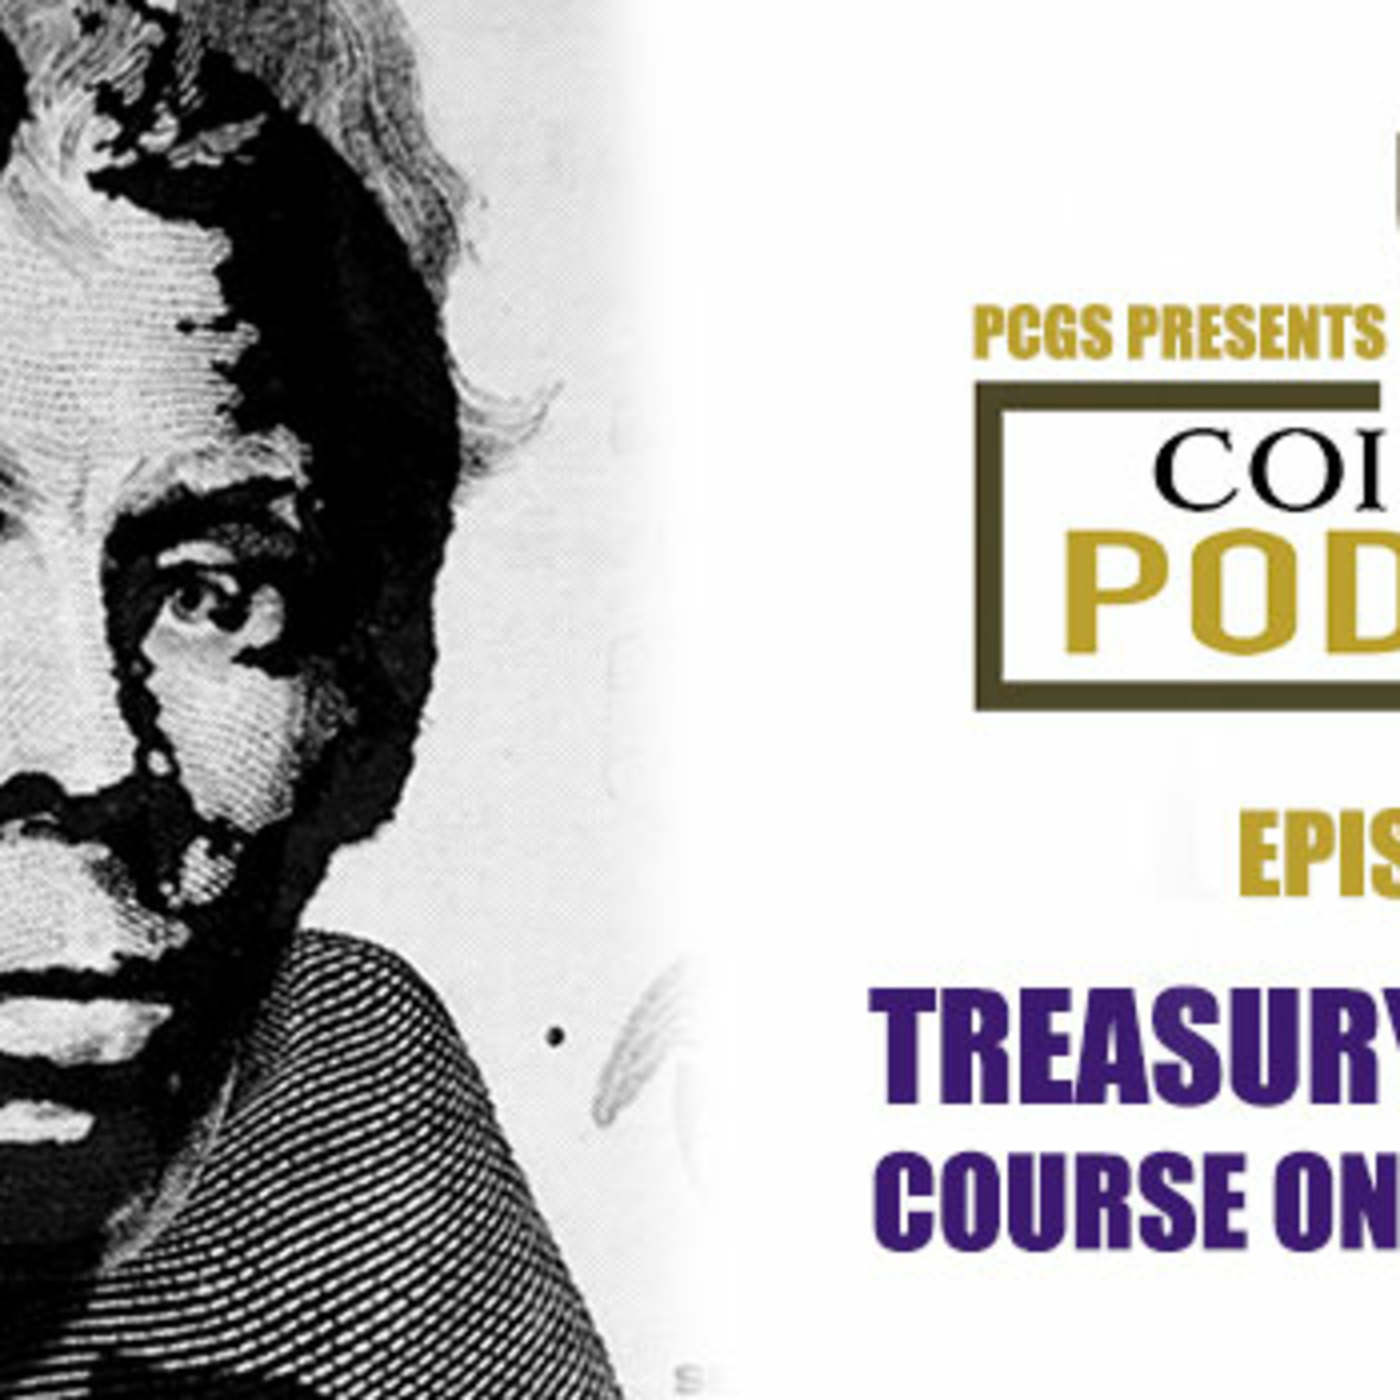 CoinWeek Podcast #117: Treasury Reverses Course on Tubman $20